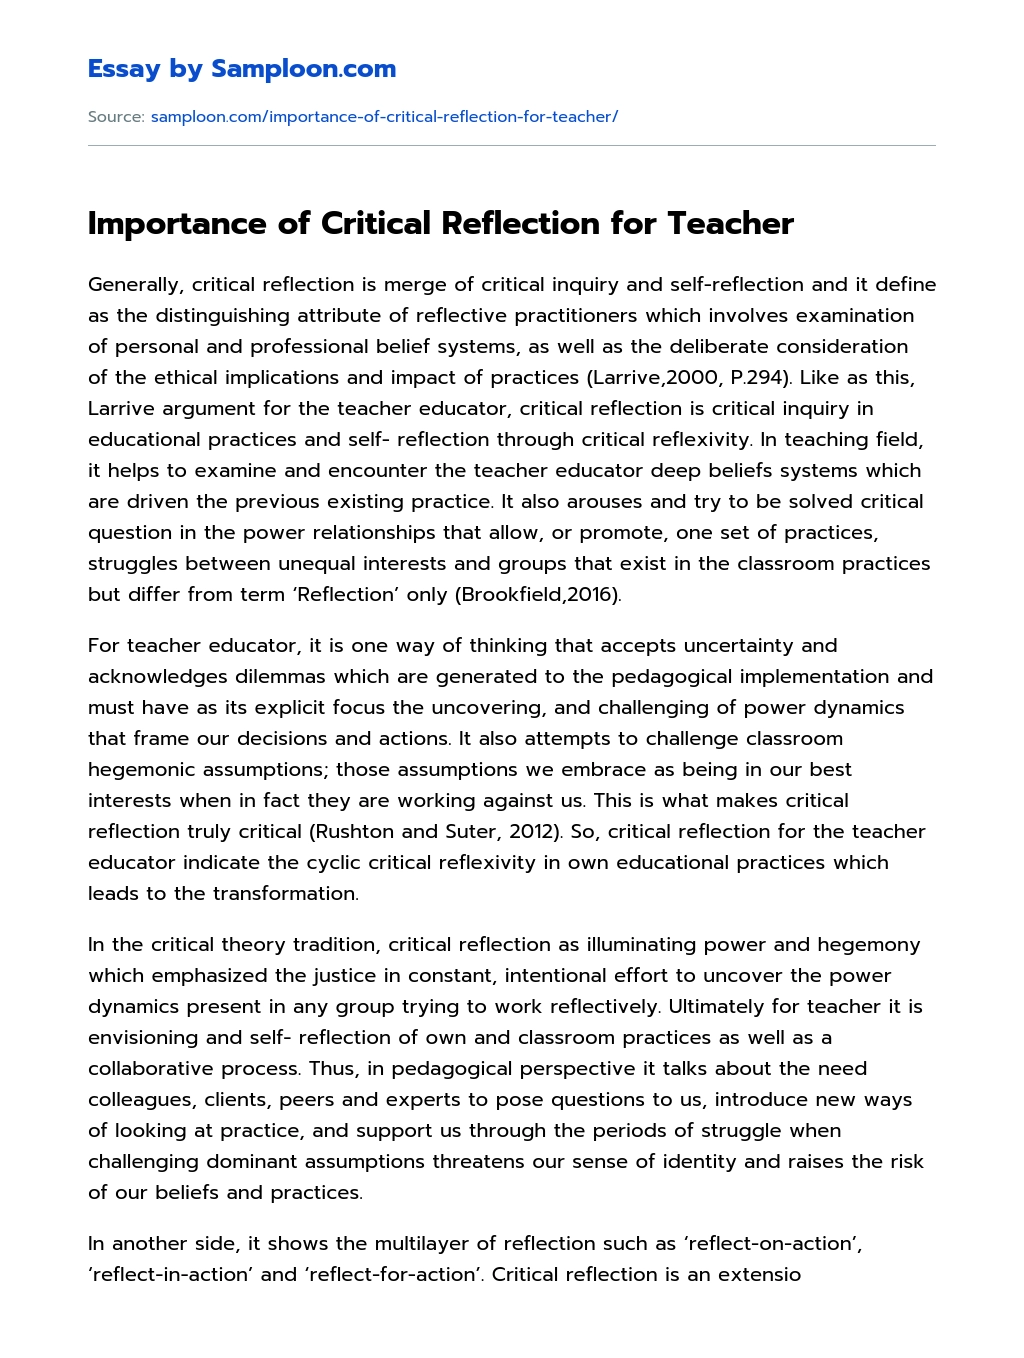 Importance of Critical Reflection for Teacher essay